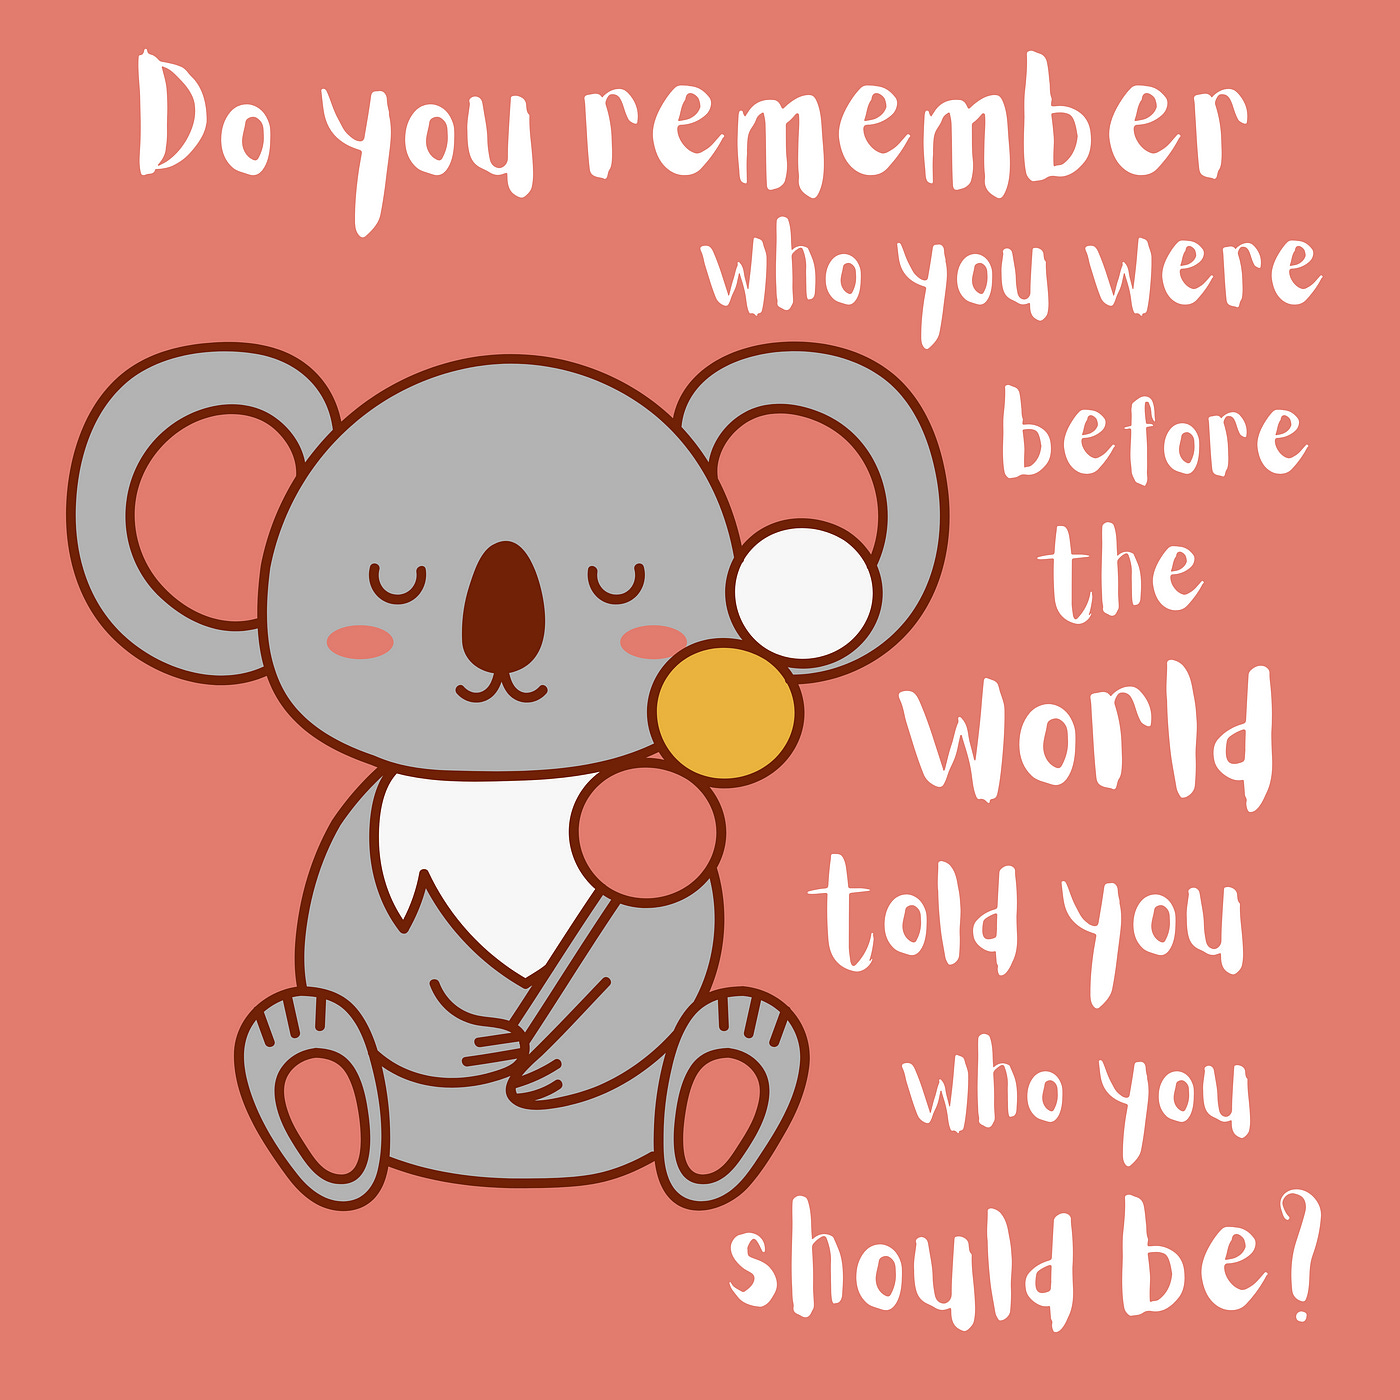 Cute mouse with the quote, “Do you remember who you were before the world told you who you should be?”